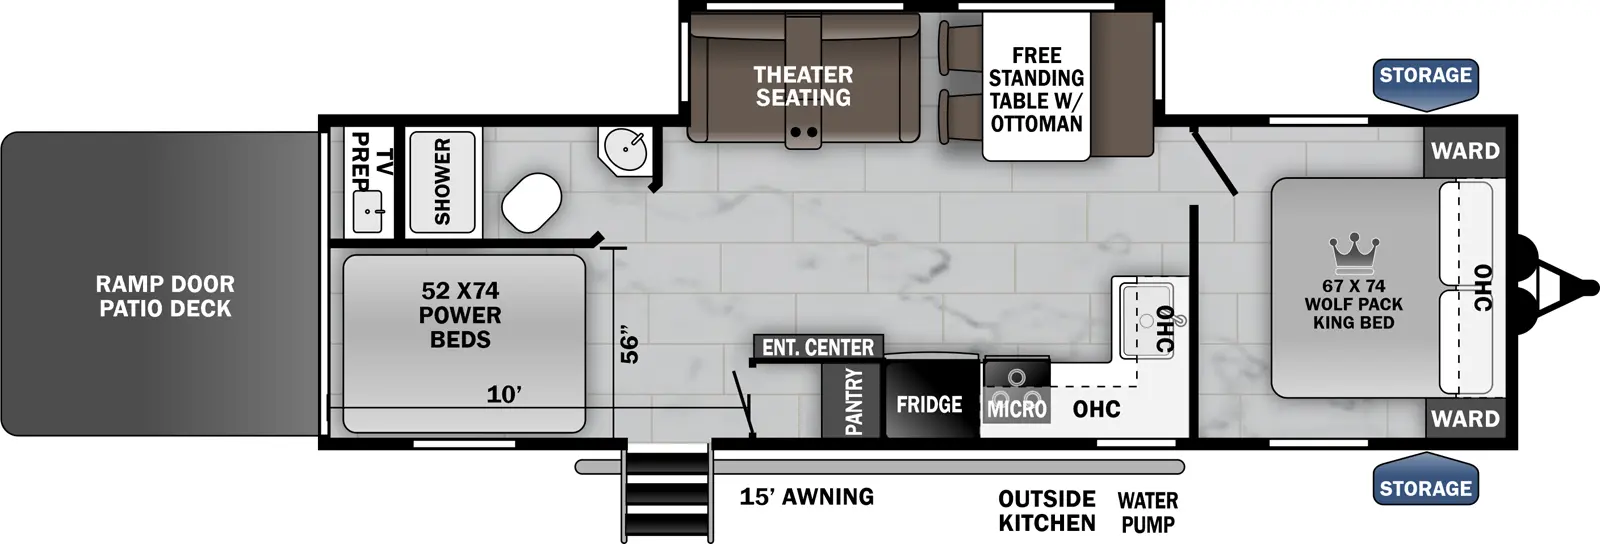 The 27PACK10 has one slide out on the off-door side and one entry door. Exterior features include a rear ramp door/ party patio, 15 foot awning on the door side, outside kitchen and pass through storage. Interior layout from front to back: front bedroom with Wolf Pack 67 by 74 king bed; living dining kitchen area with off-door side slide out containing a sofa and dinette with theater seat option in place of sofa; door side kitchen countertop with pantry, entertainment center with fireplace, refrigerator, overhead microwave, cook top stove, overhead cabinets and kitchen sink; Happijac bed lift system in the door side rear corner; and full bathroom in the off-door side rear corner. Rear cargo area dimensions are 10 foot long by 56 inches wide and located in the door side rear corner.